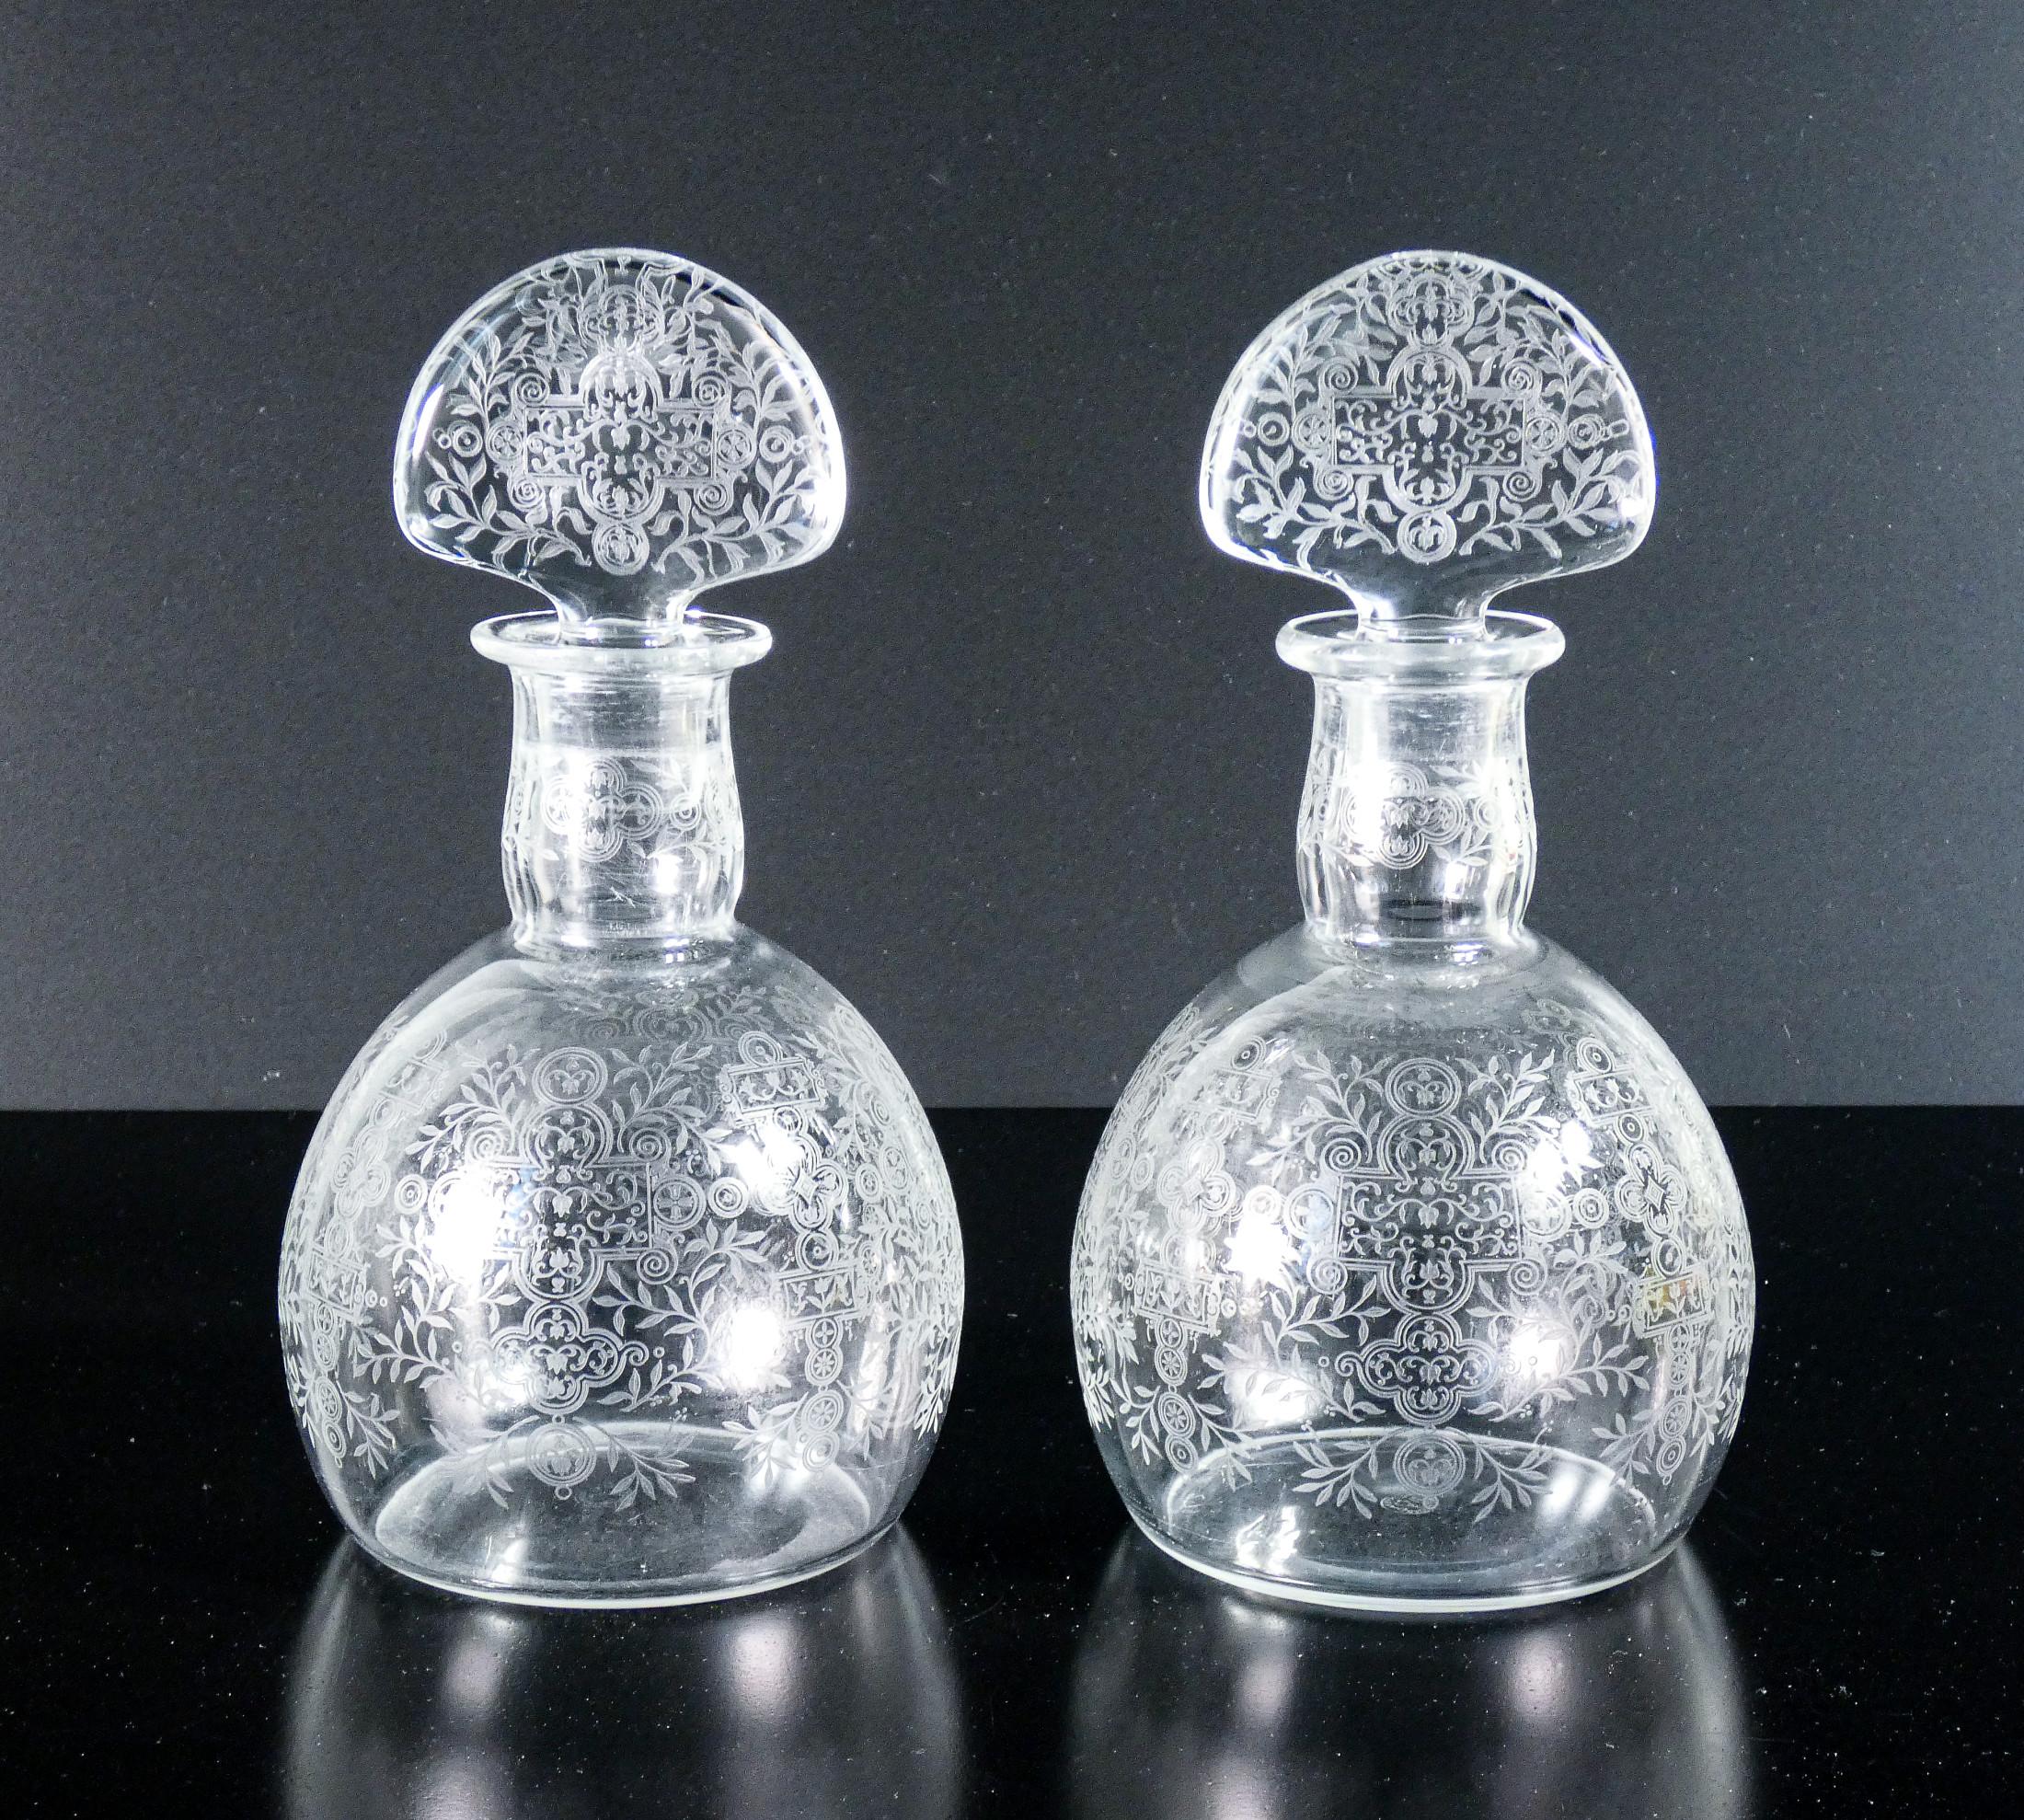 Pair of bottles
crystal BACCARAT,
i was dying Marillon.

ORIGIN
France

PERIOD
1940s

MARK
Baccarat
France

MODEL
Bottles decorated with
the Marillon motif

MATERIALS
Crystal

DIMENSIONS
H 23 cm
Ø 12 cm

CONDITIONS
The pieces are in excellent